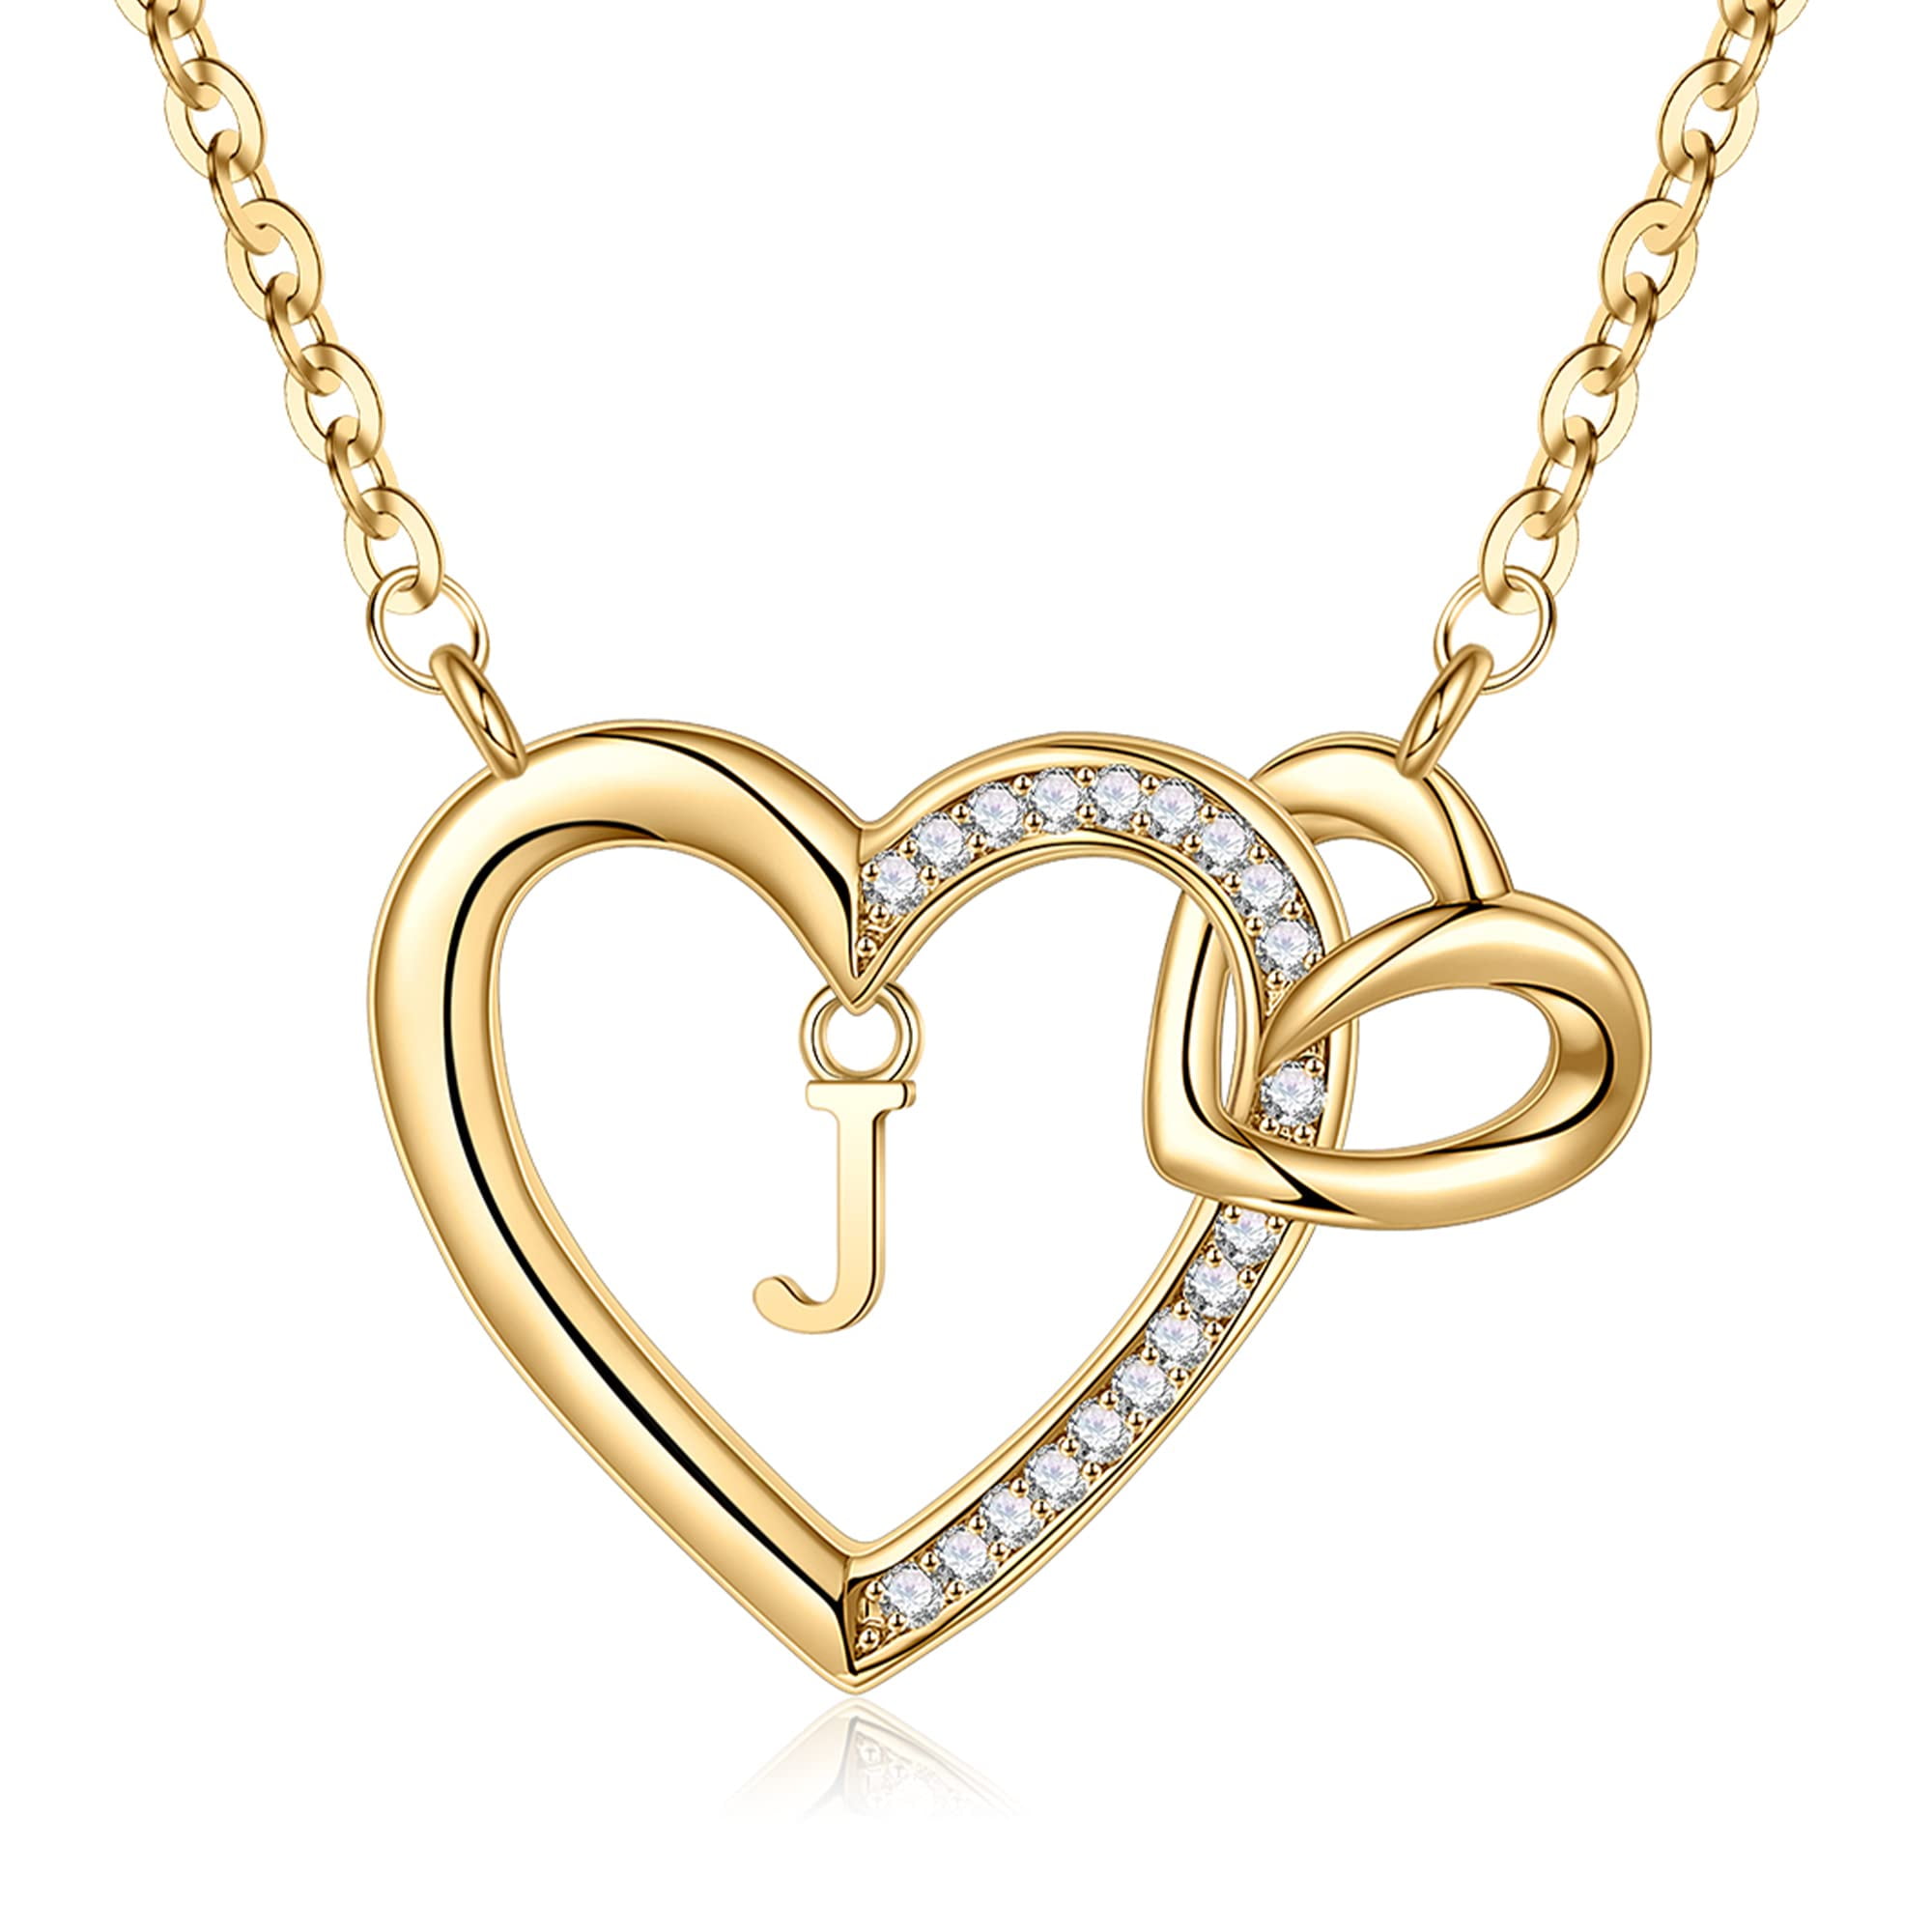 Open Heart Necklace, Teenage Girl Gifts, Strong Woman Gifts, Gifts for Teenage Girls, 18K Yellow Gold Finish / Standard Box